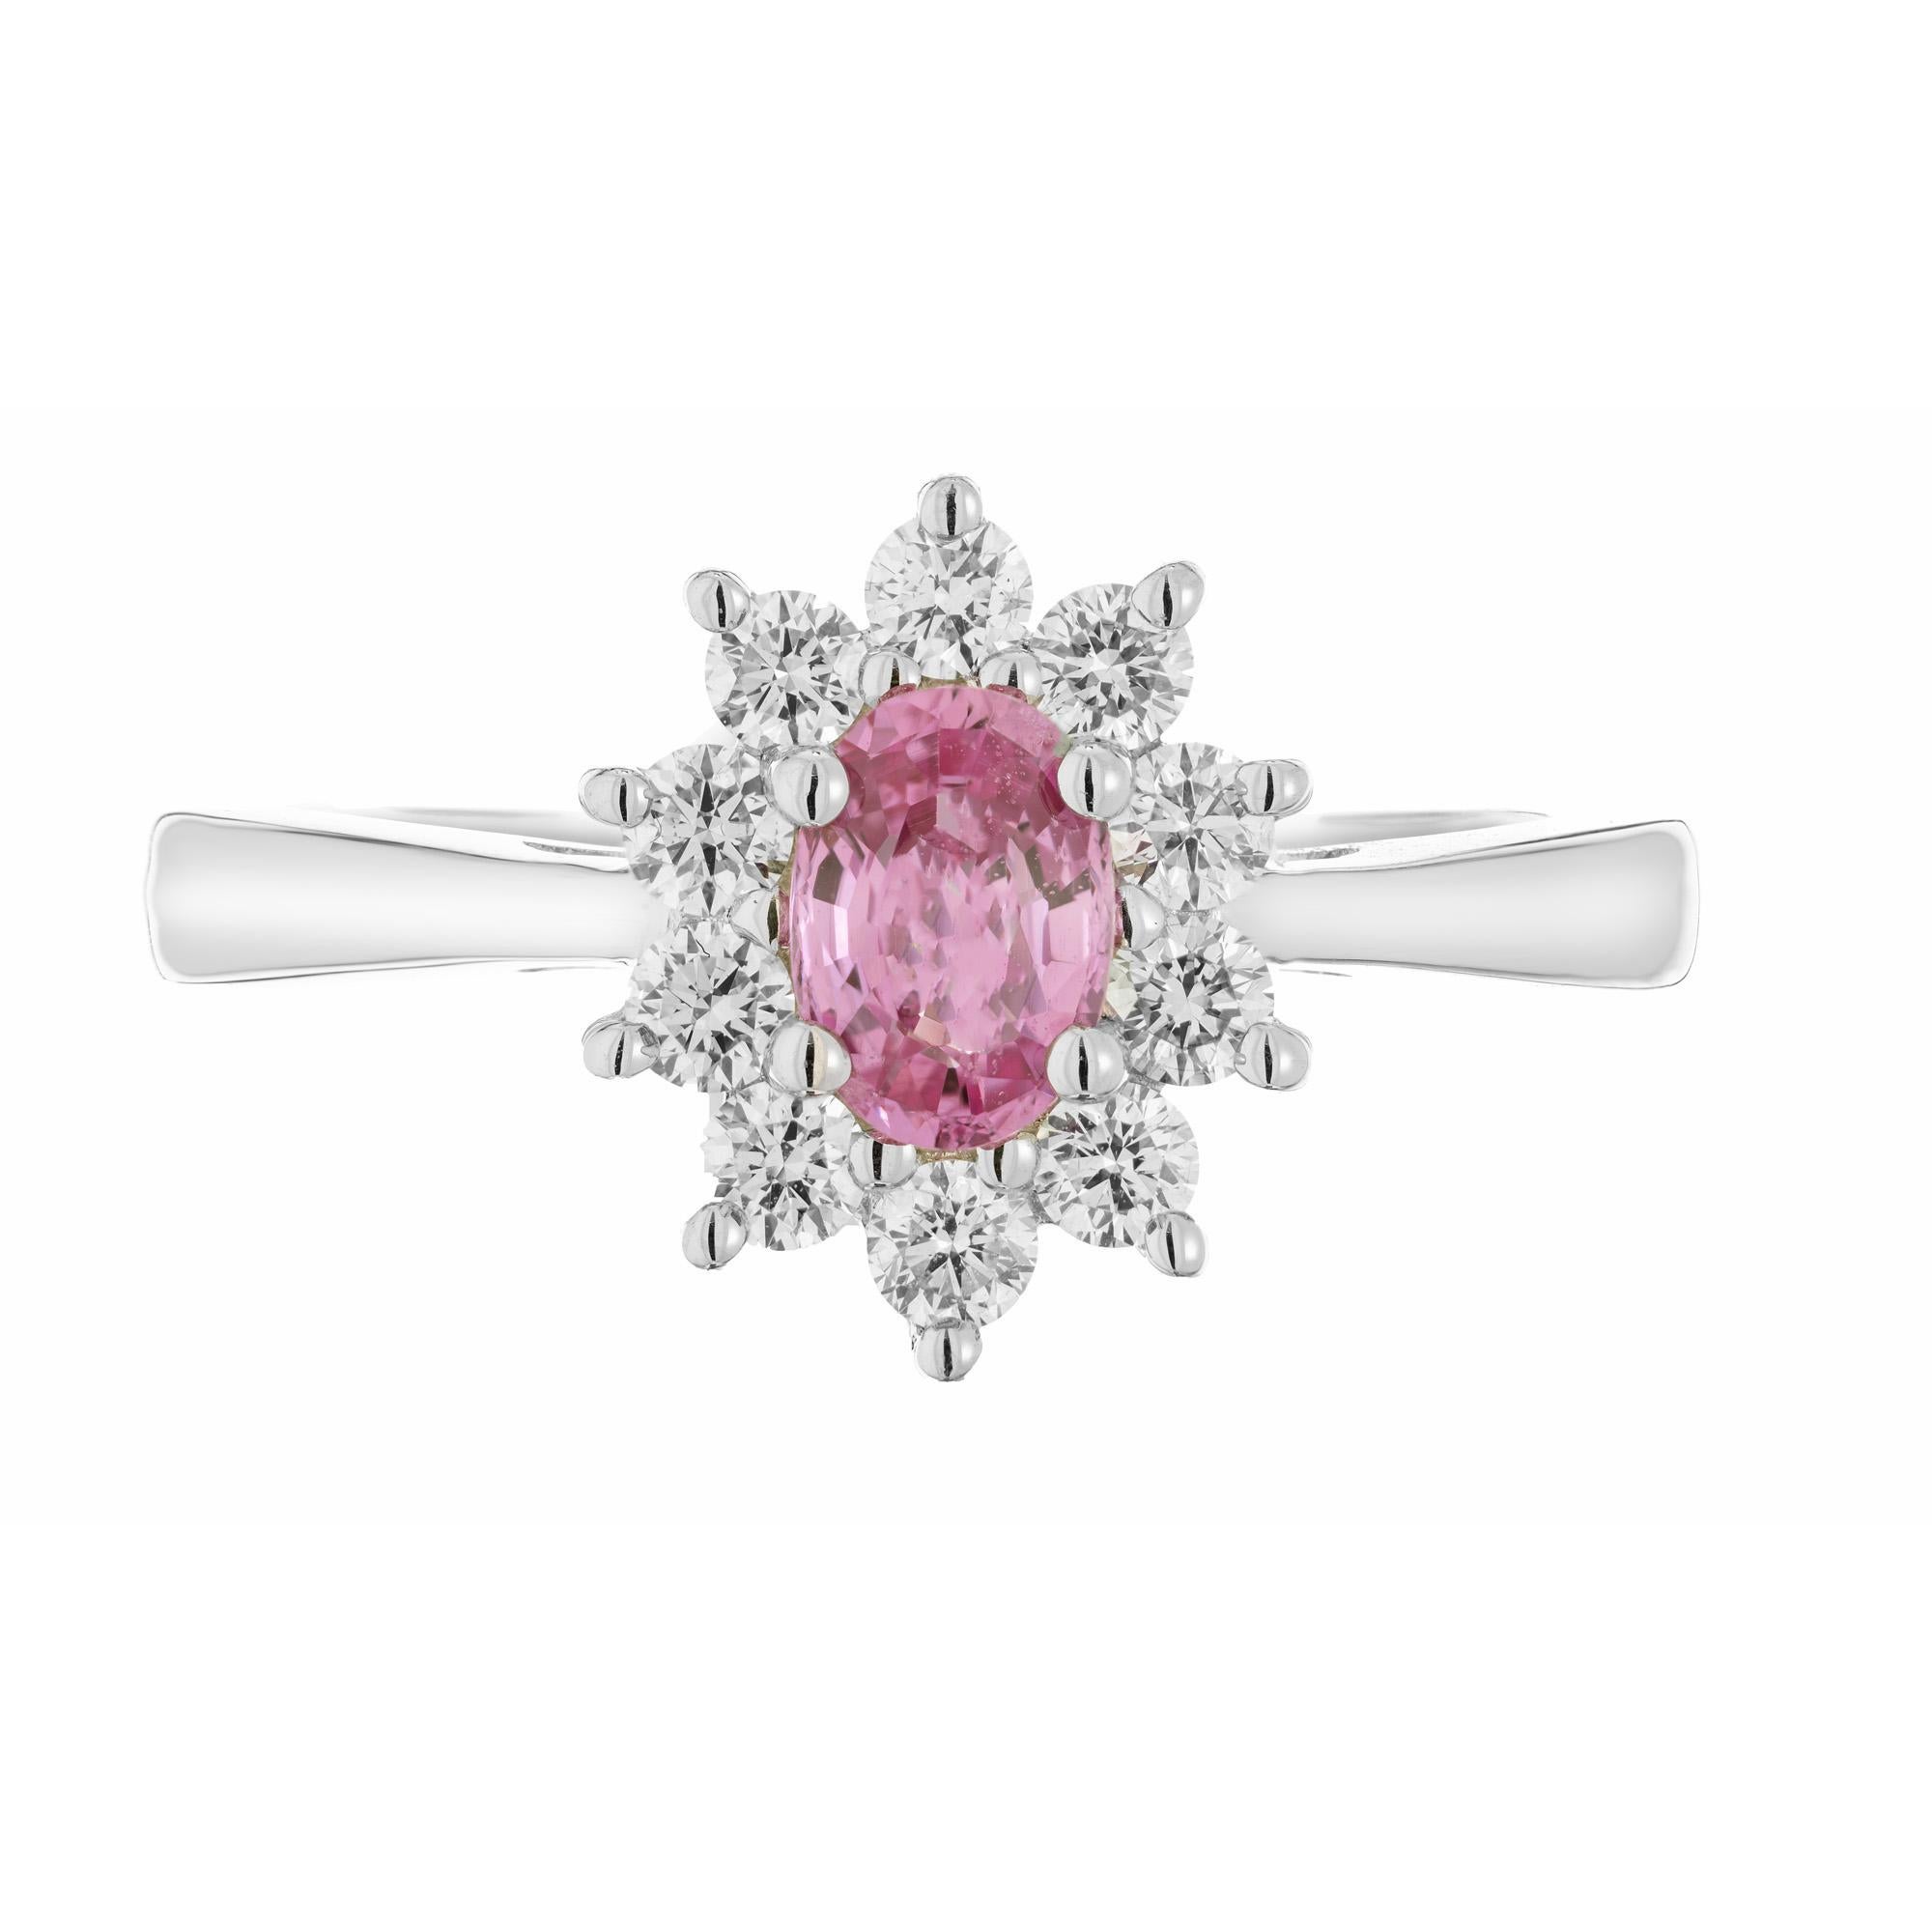 Pink Sapphire and Diamond halo gold engagement ring. The center piece of the ring is a .62cts oval pink sapphire that is mounted in a 14k white gold setting, accented by a halo of 10 round brilliant cut diamonds. The sapphire has a beautiful